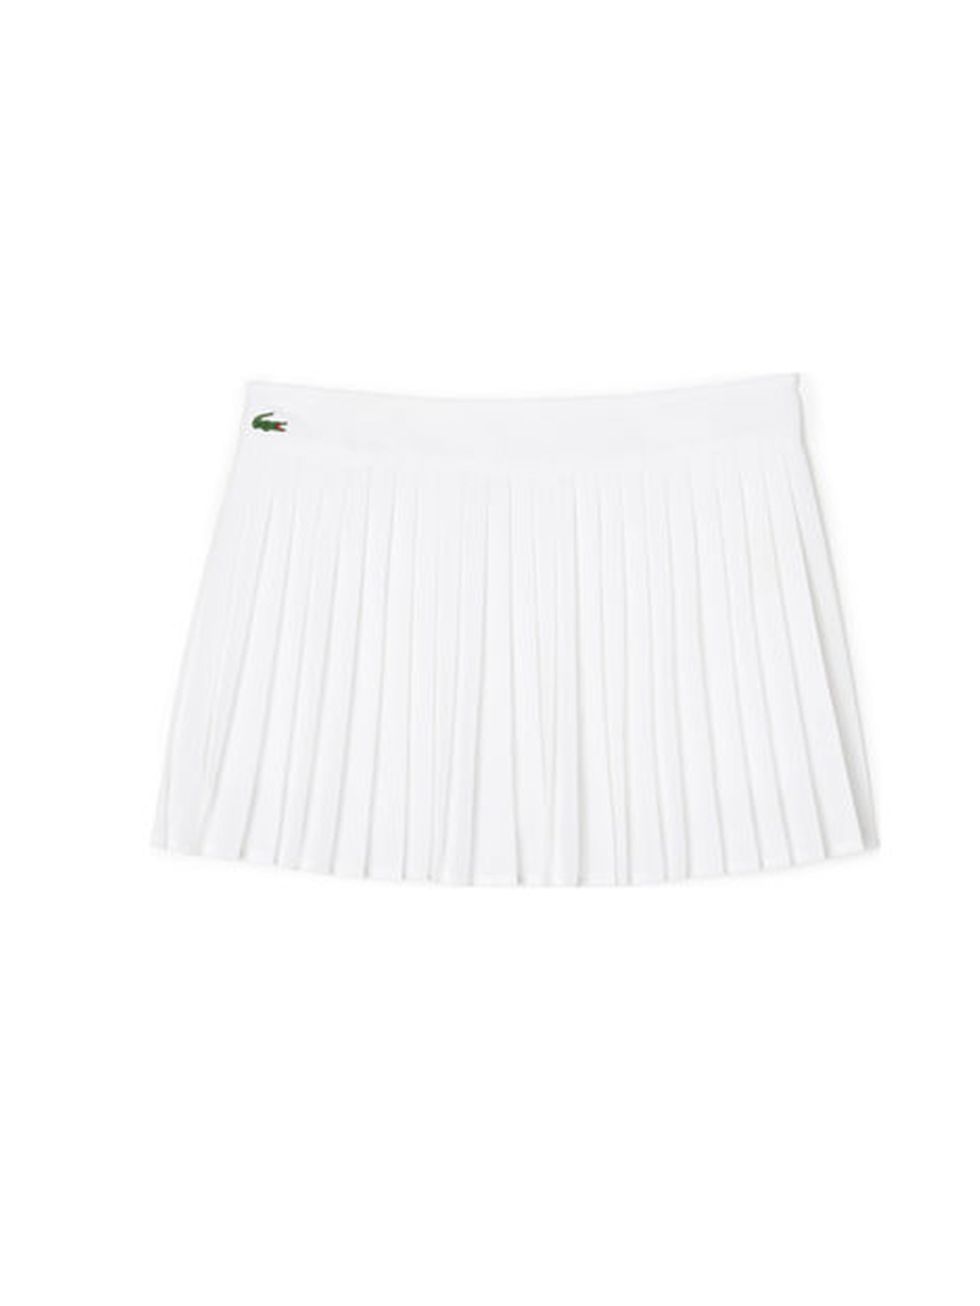 <p><a href="http://www.lacoste.com/gb/lacoste/women/clothing/dresses-skirts/pleated-skirt-in-stretch-jersey/JF7361-00.html?lang=en&dwvar_JF7361-00_color=001" target="_blank">Lacoste tennis skirt</a>, £75</p>